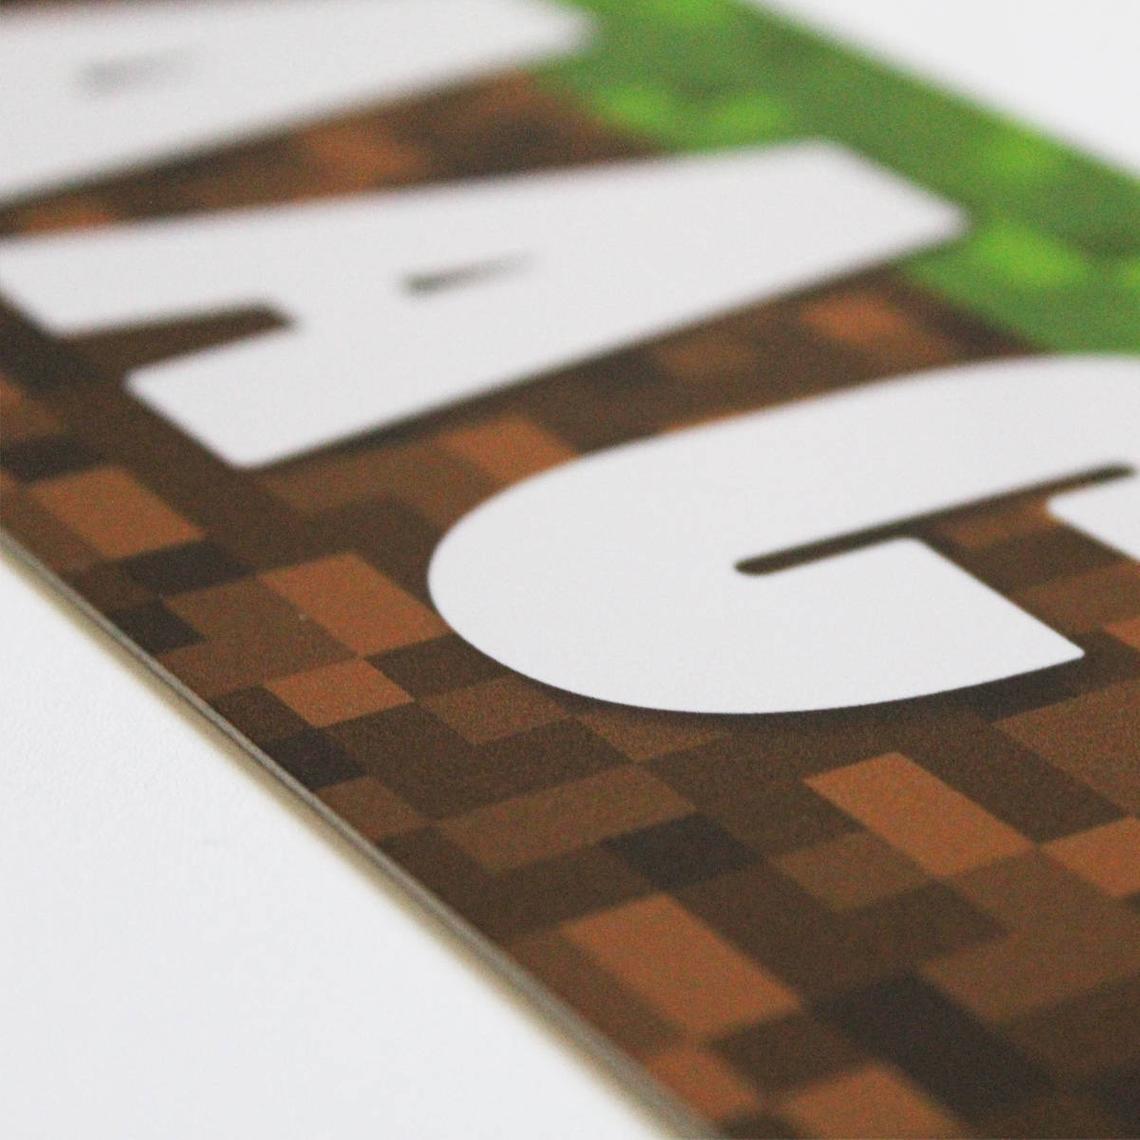 Customizable Kids Name Sign | Minecraft Inspired - The Sign Shoppe 